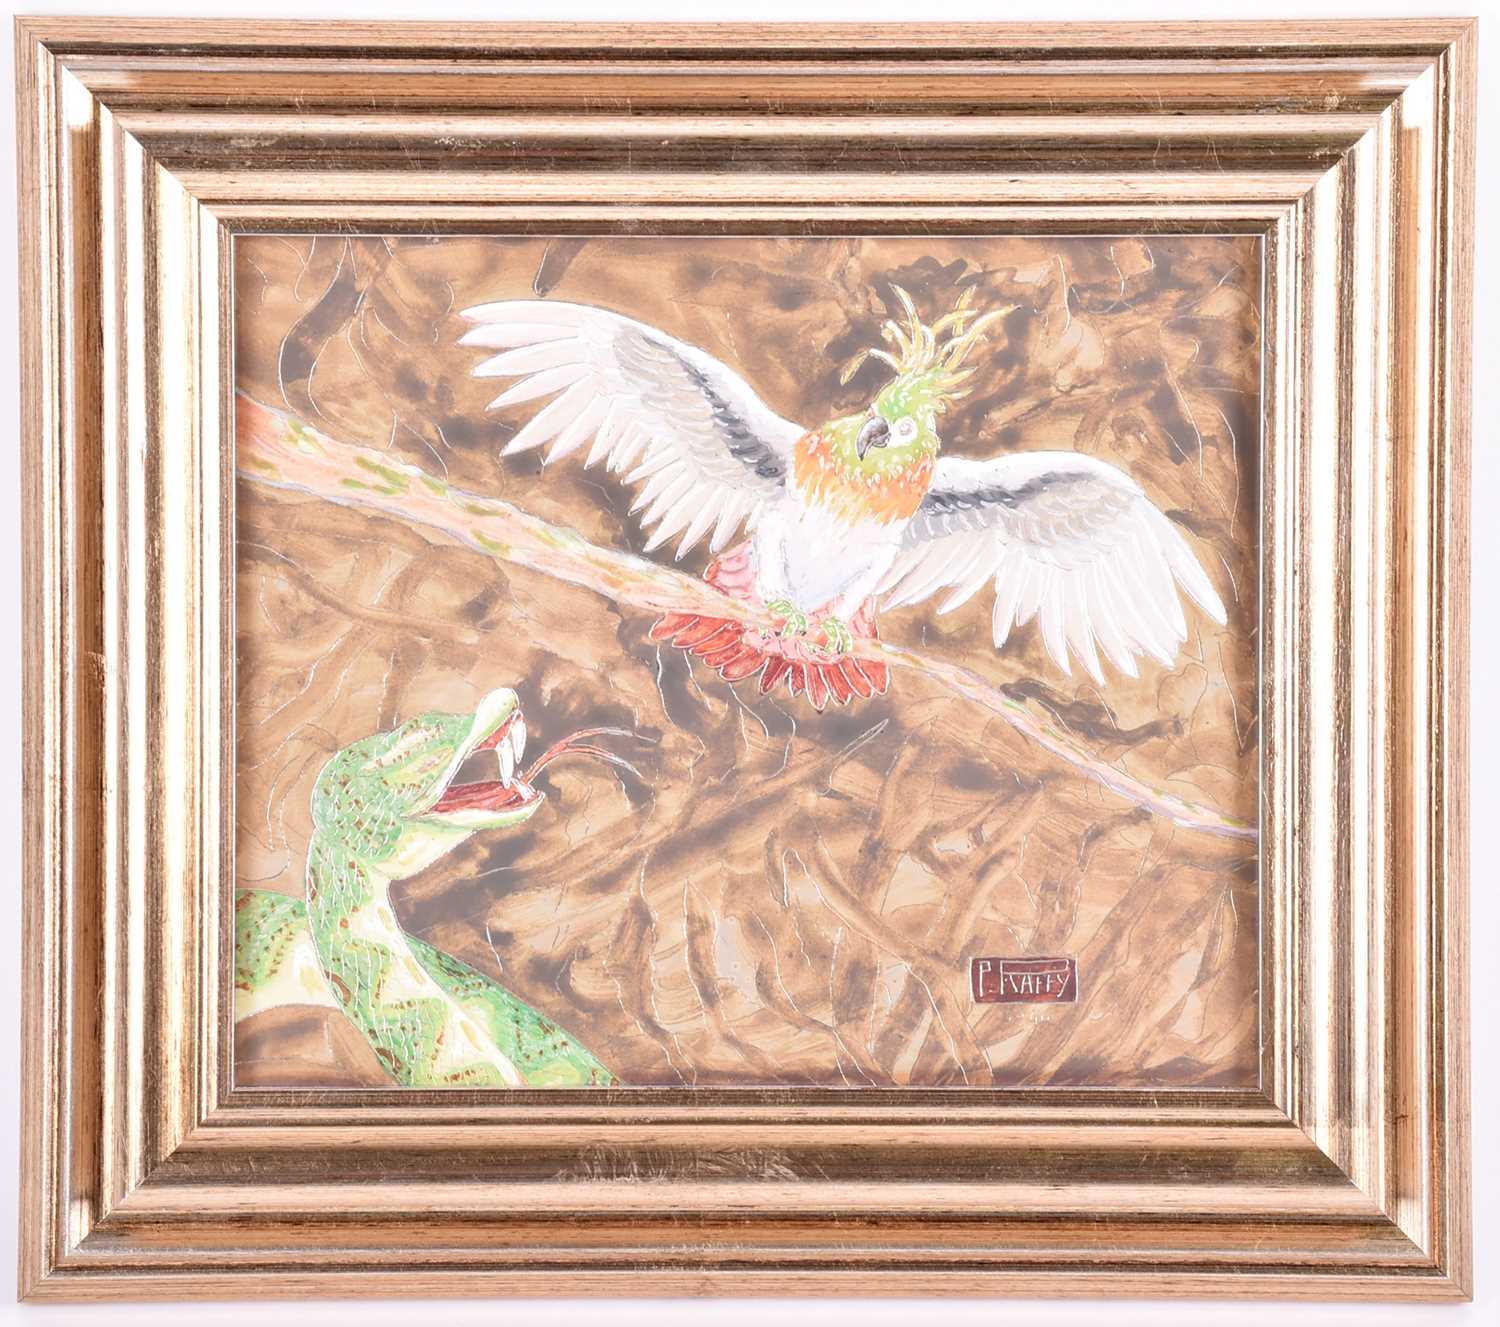 Pierre Raffy (born 1919) French, a snake trying to catch a bird on a branch, mixed media, signed and